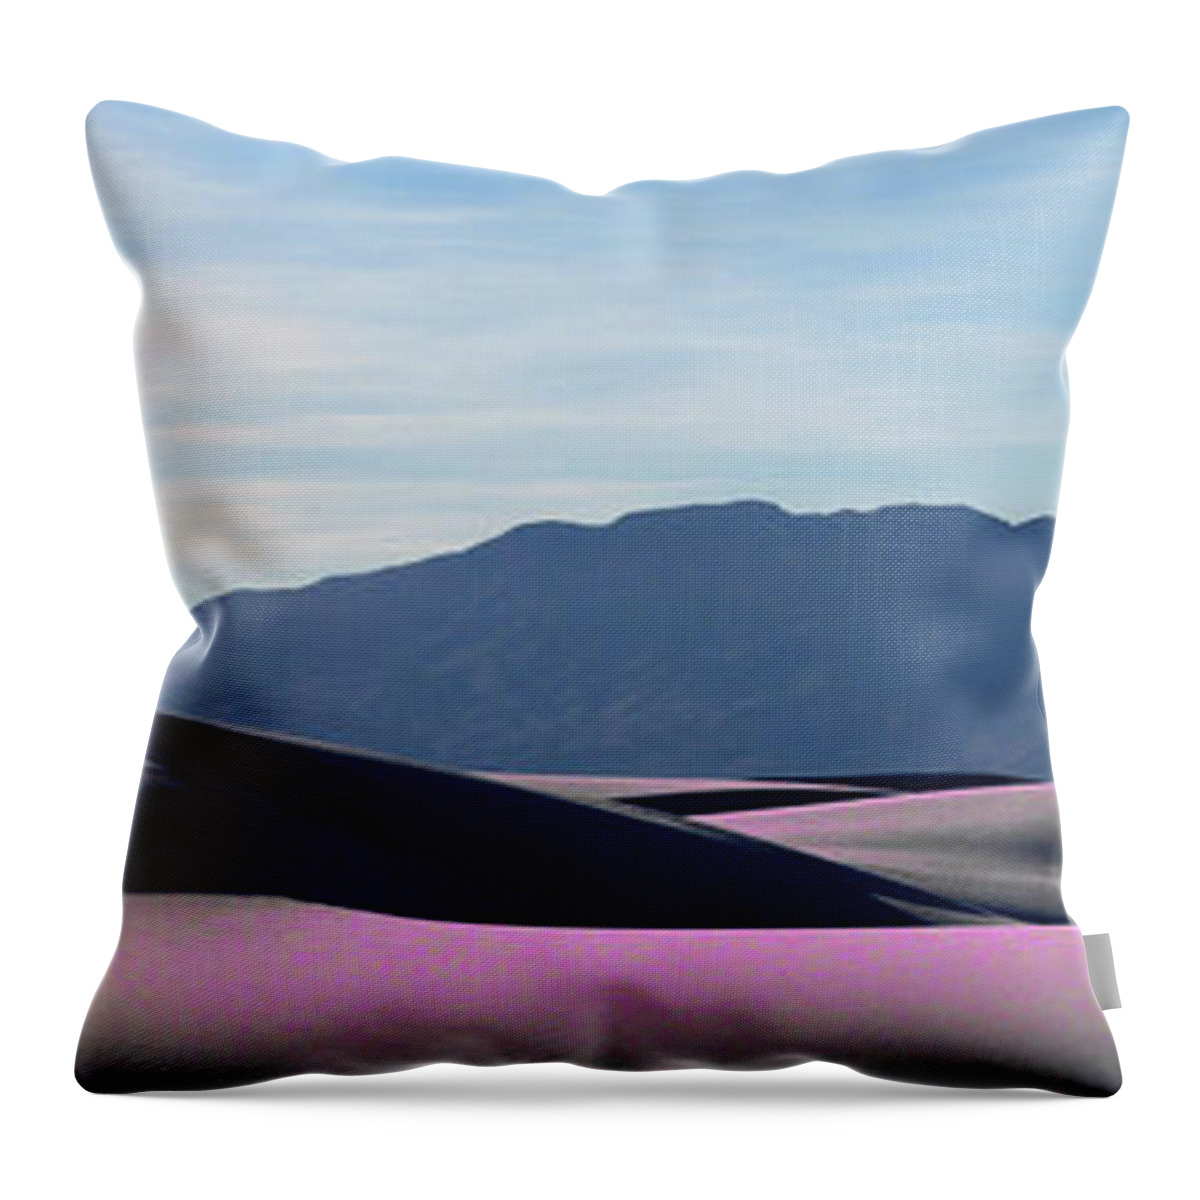 Framed Prints Of The White Sands National Monument Throw Pillow featuring the photograph White Sands Sunset by Jack Pumphrey